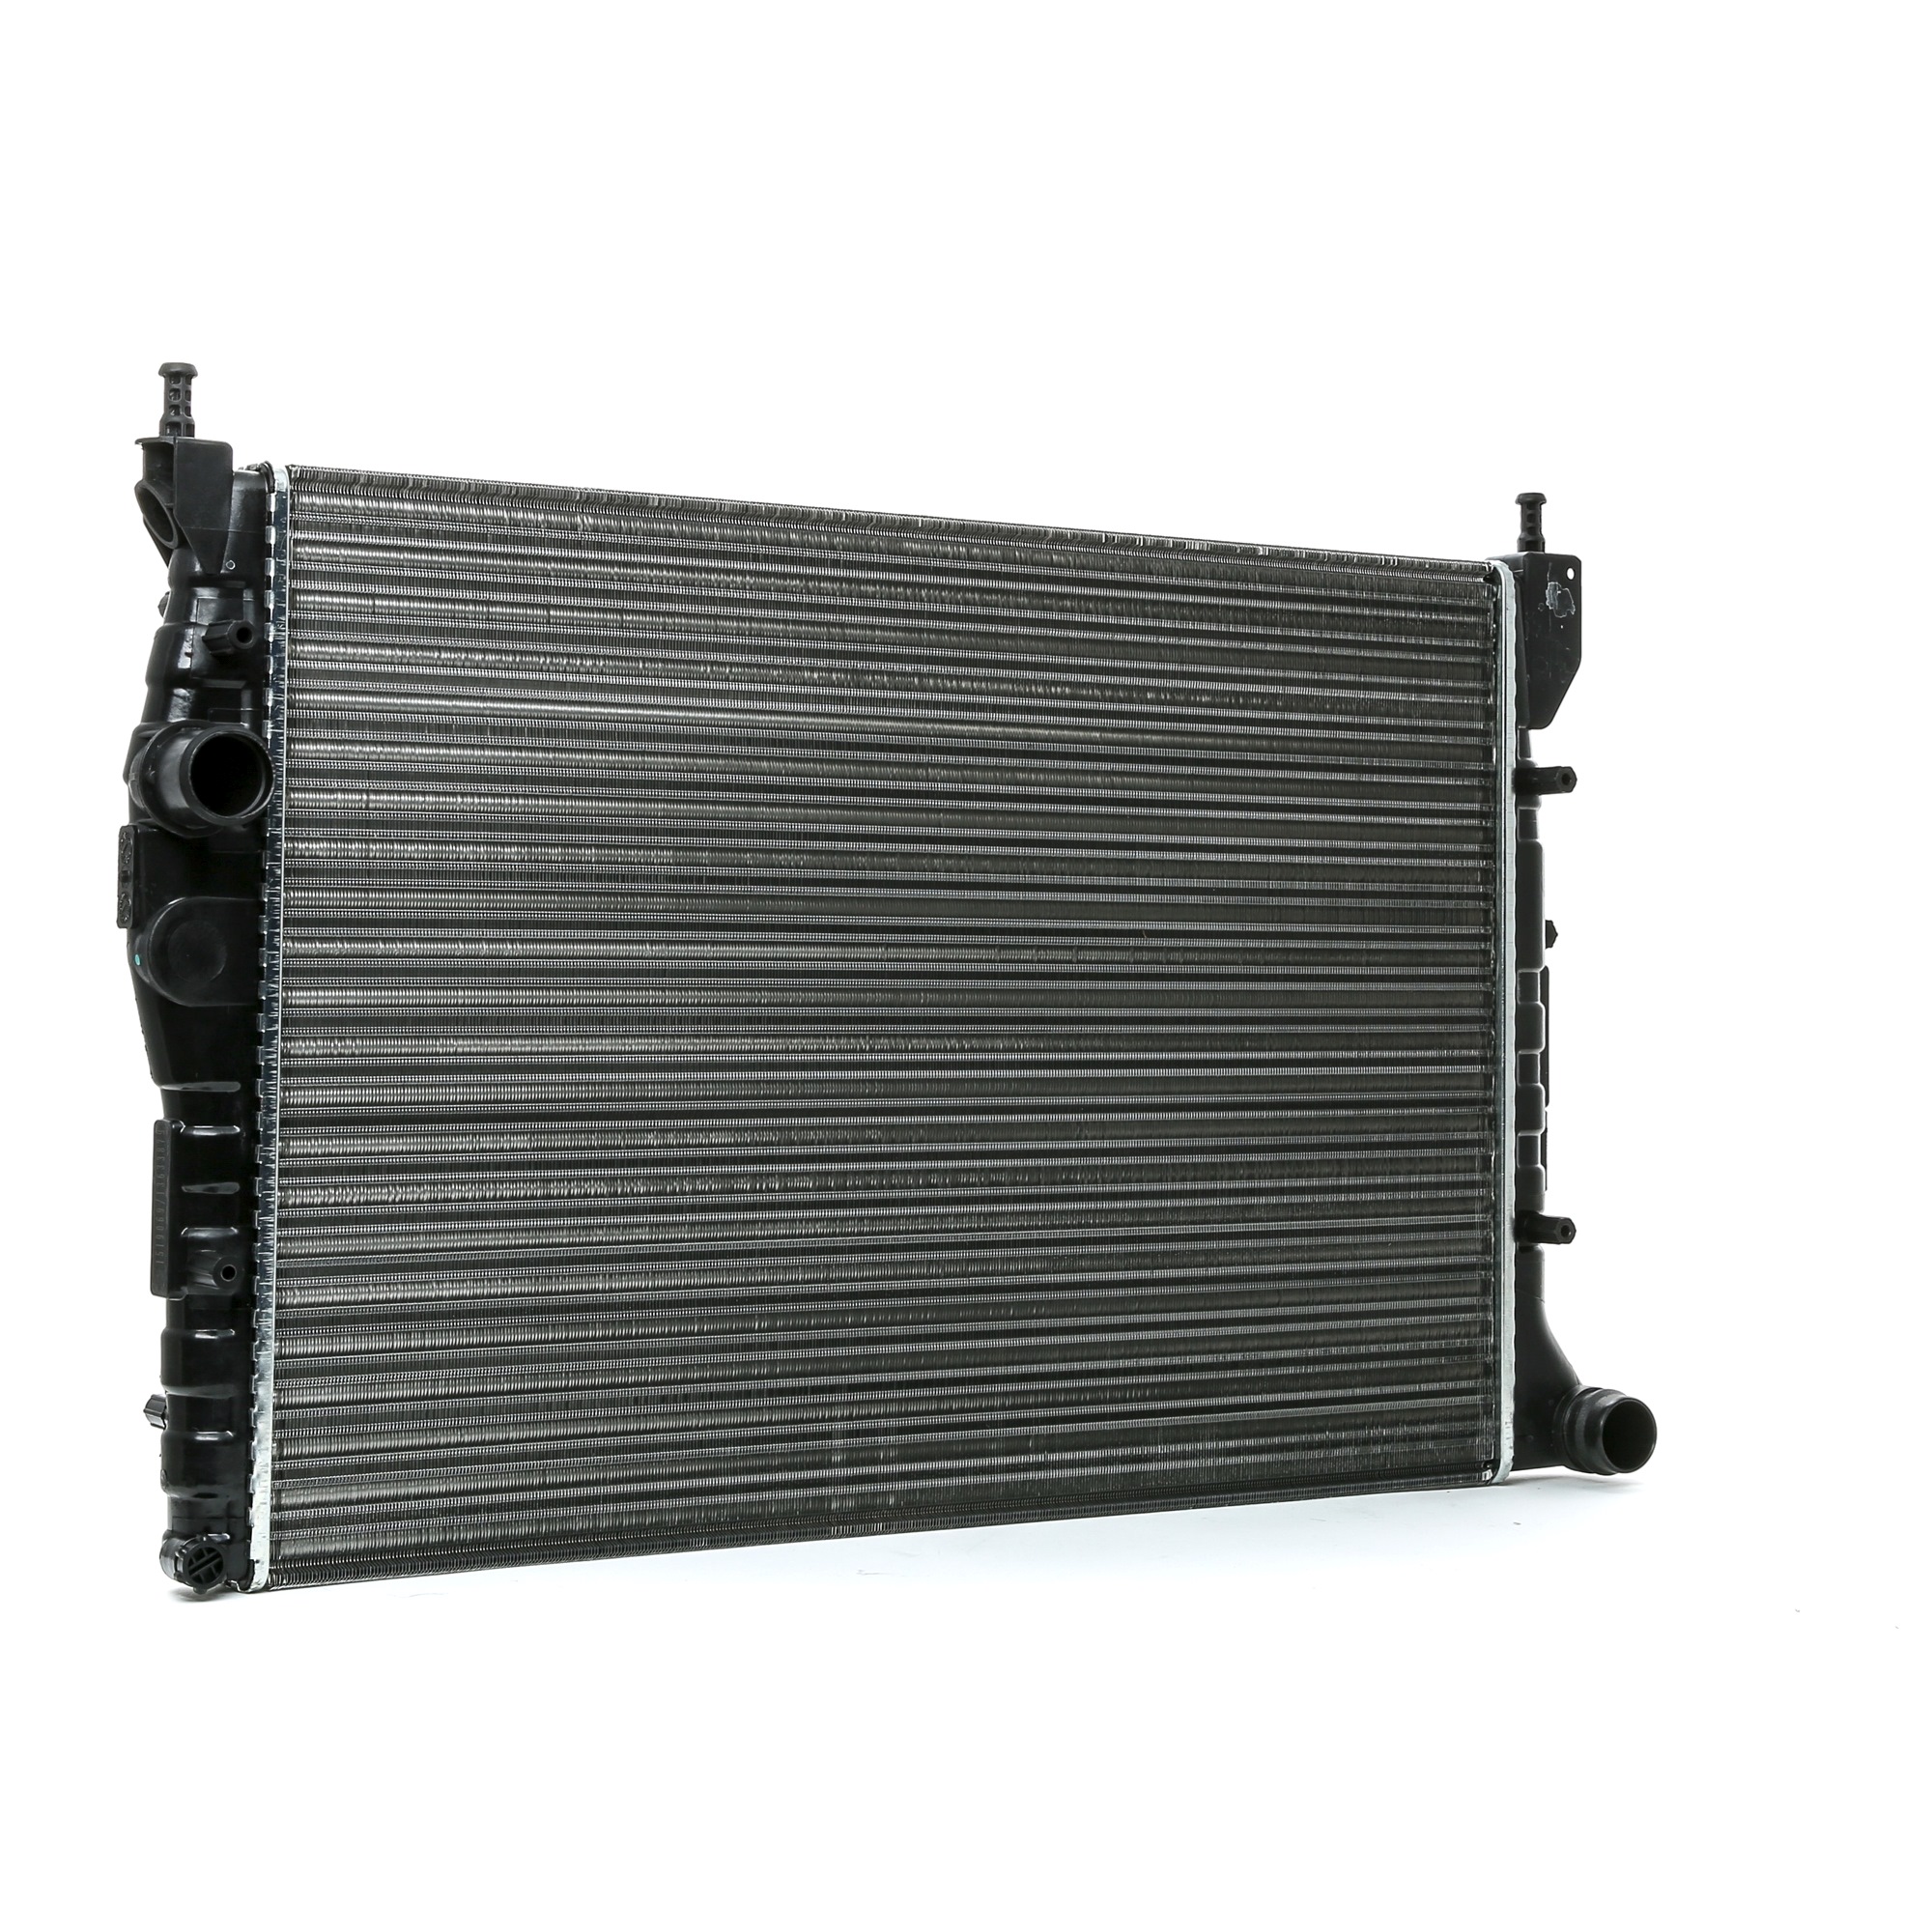 RIDEX 470R0612 Engine radiator Aluminium, 580 x 415 x 34 mm, without frame, Mechanically jointed cooling fins